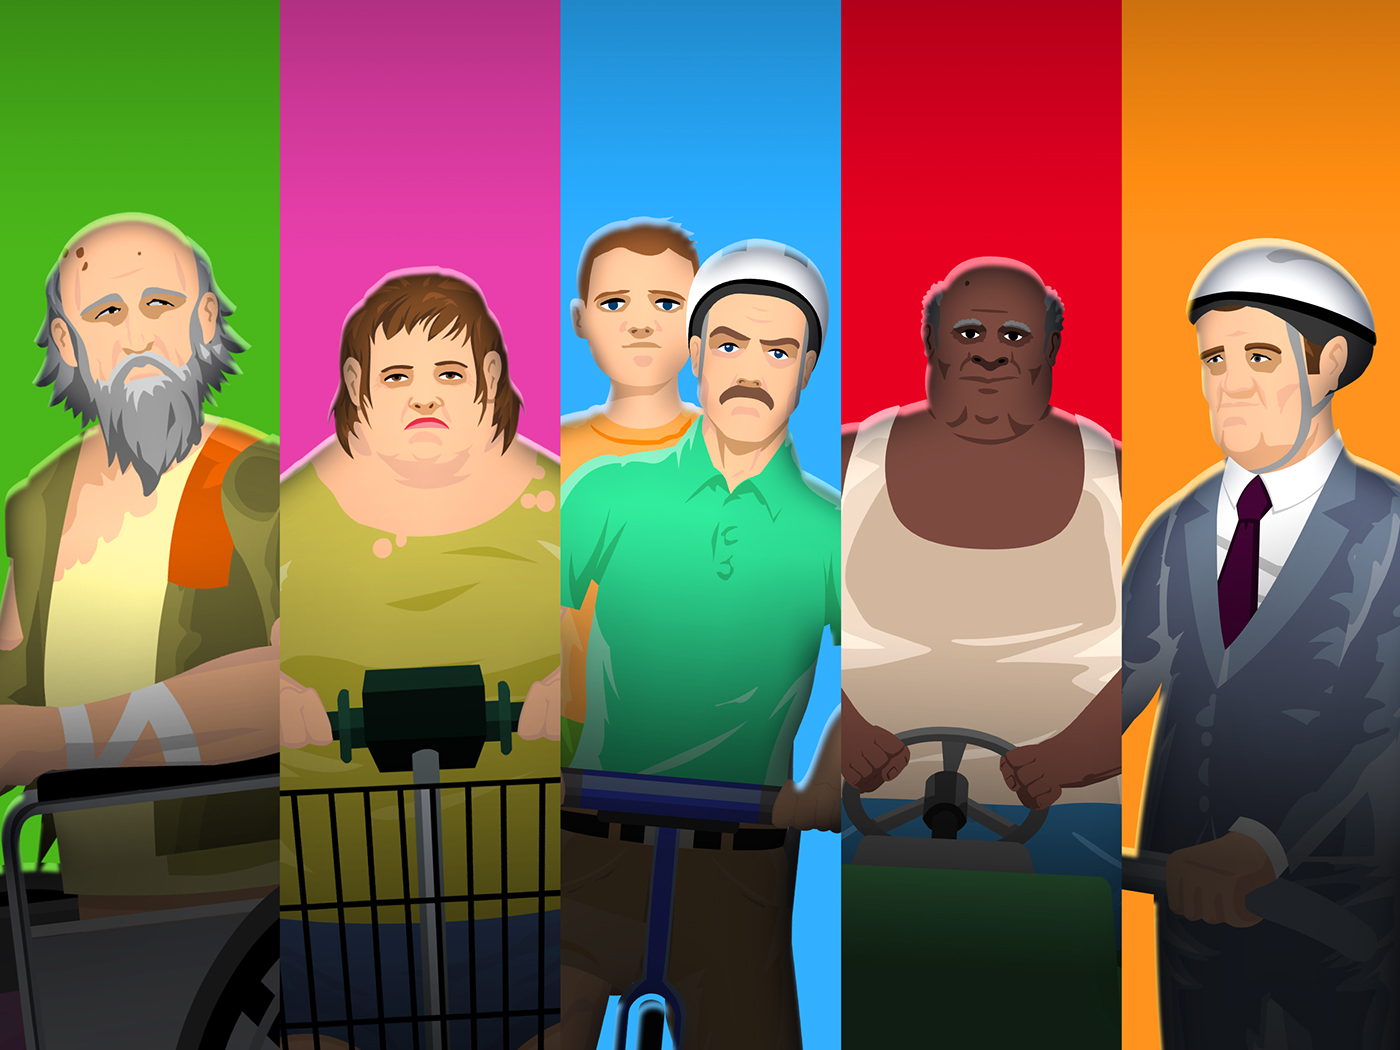 Happy Wheels: The Series: Episode 9 - Back To The Present on Vimeo